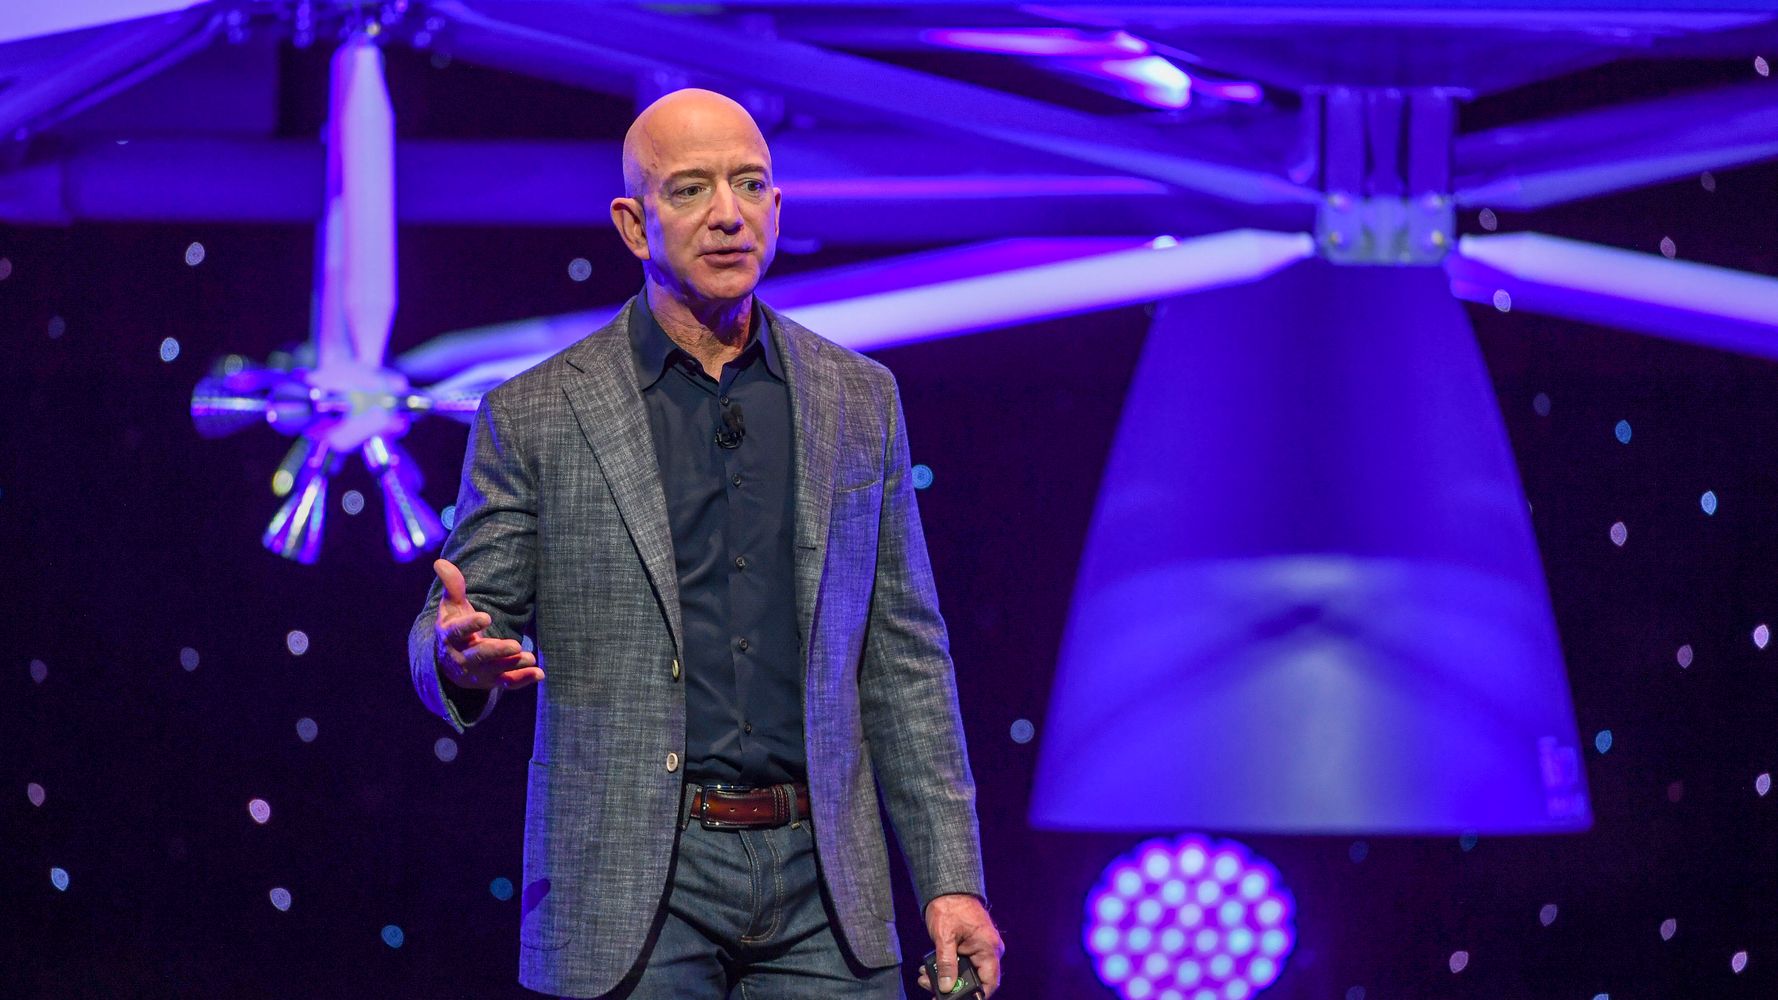 Jeff Bezos Announces He’s Going To Space